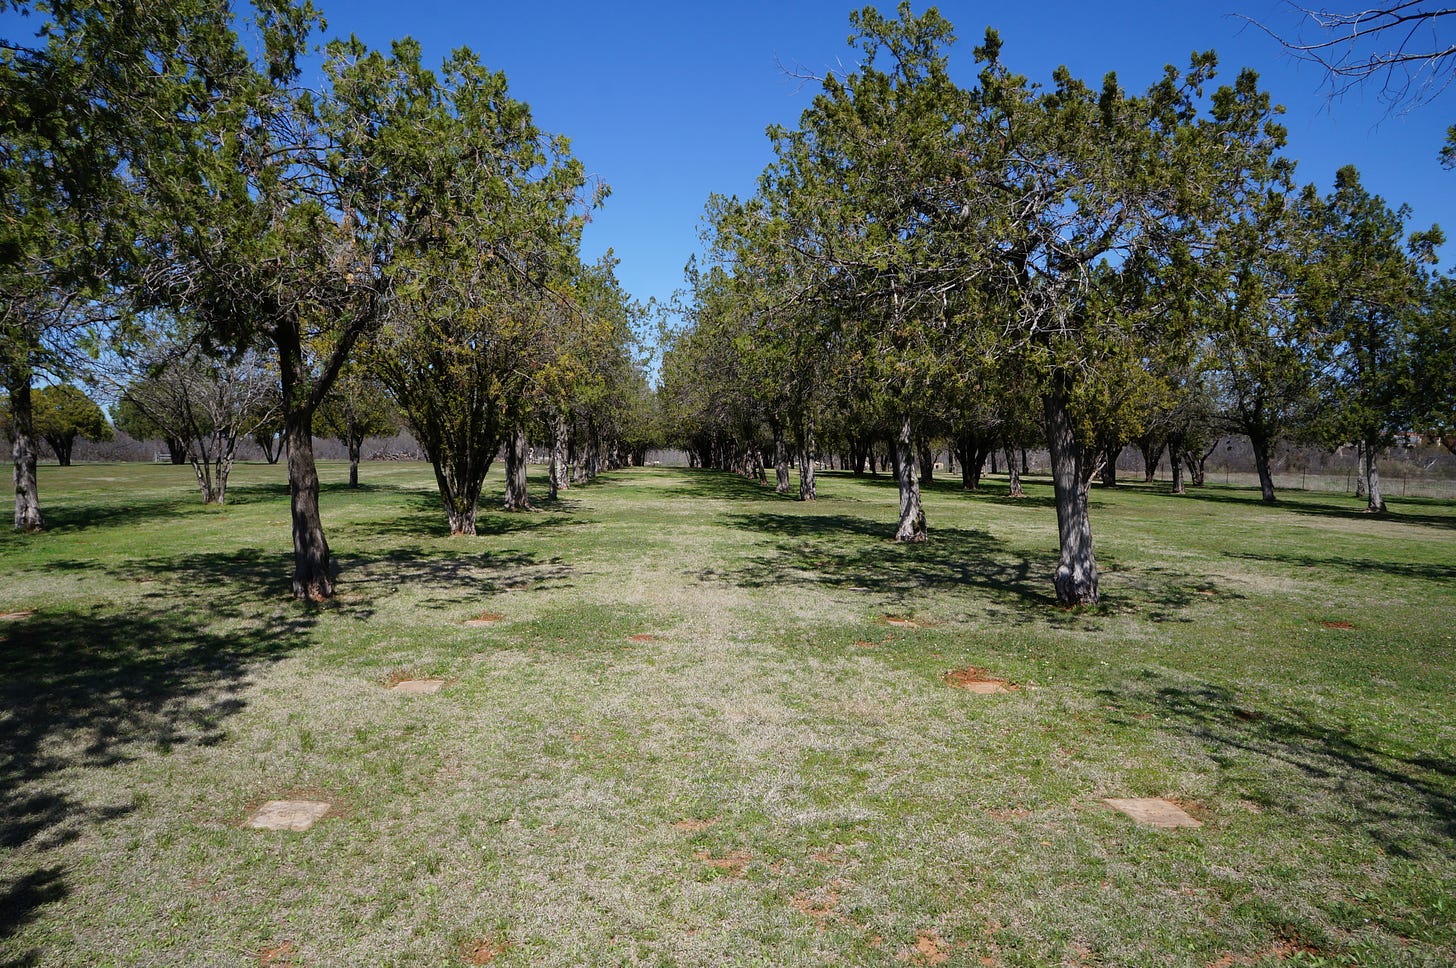 Two rows of mesquite trees line two rows of graves on a sunny cloudless day. Other lines of trees and graves are visible in the distance.